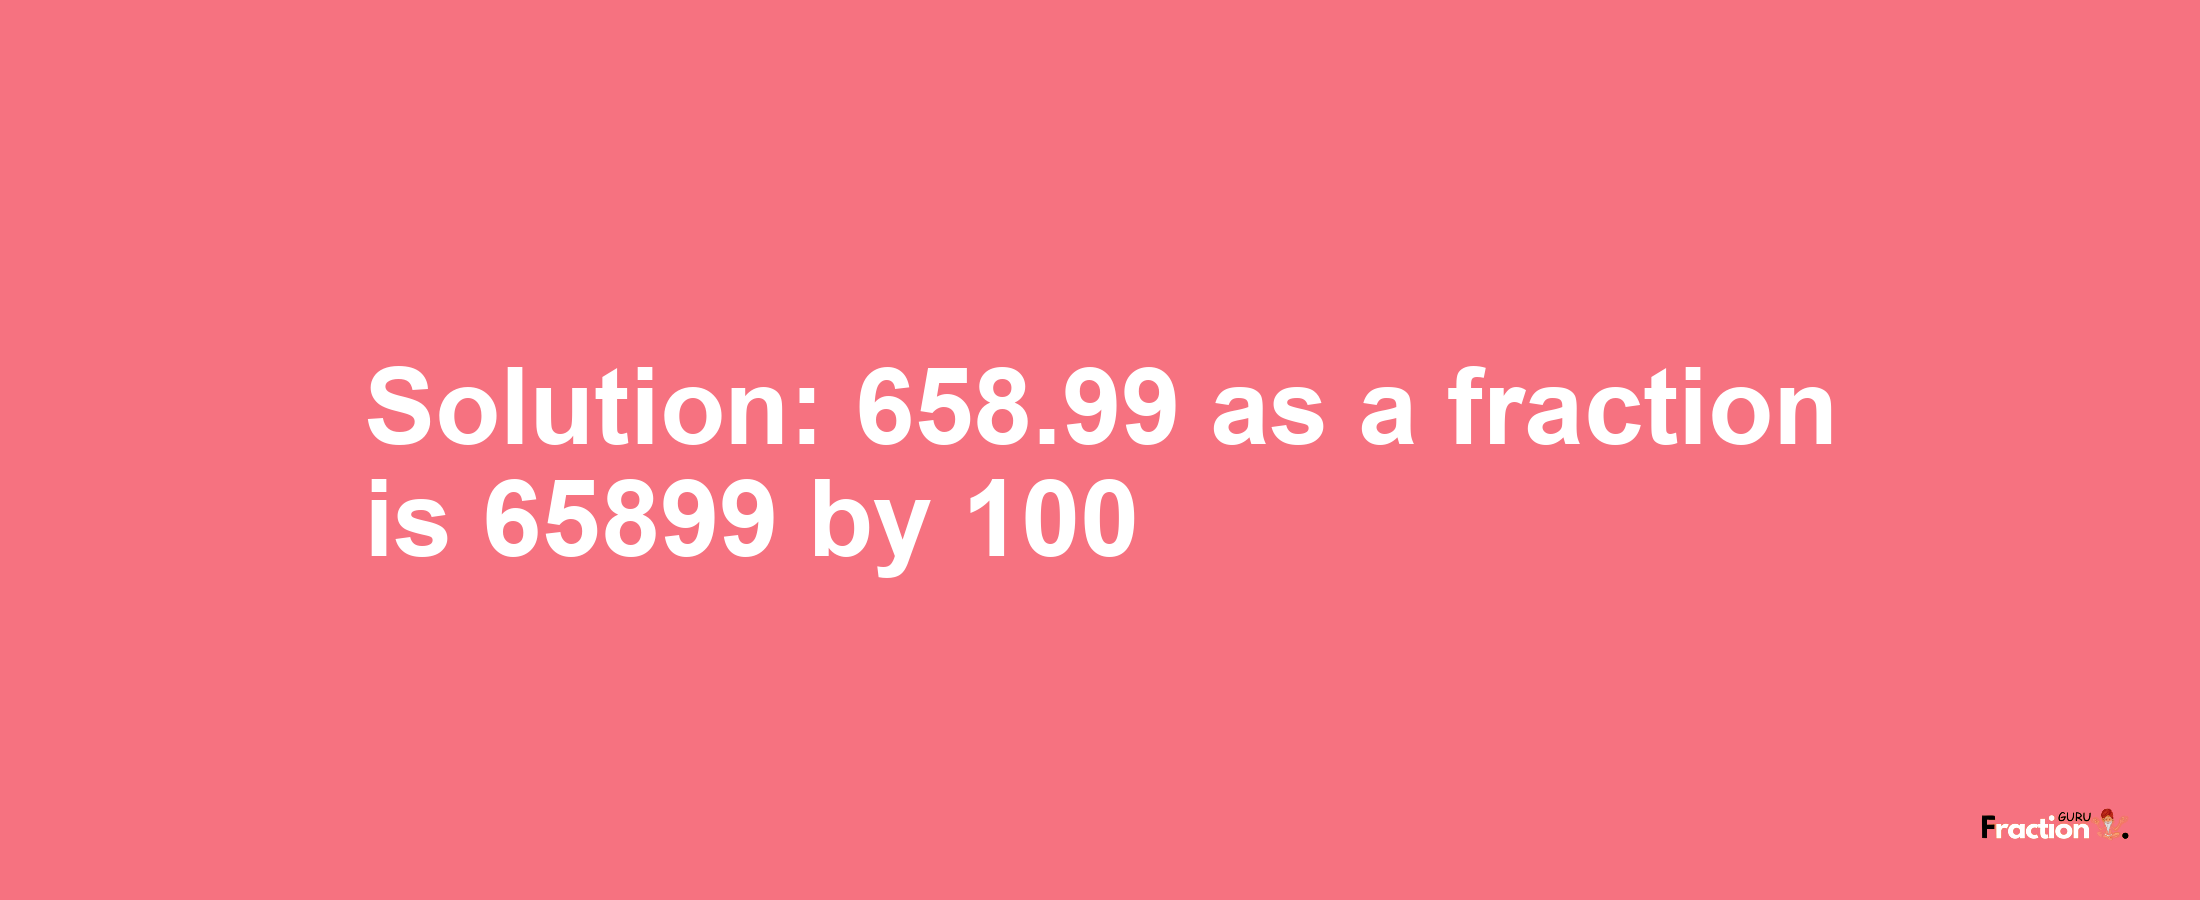 Solution:658.99 as a fraction is 65899/100